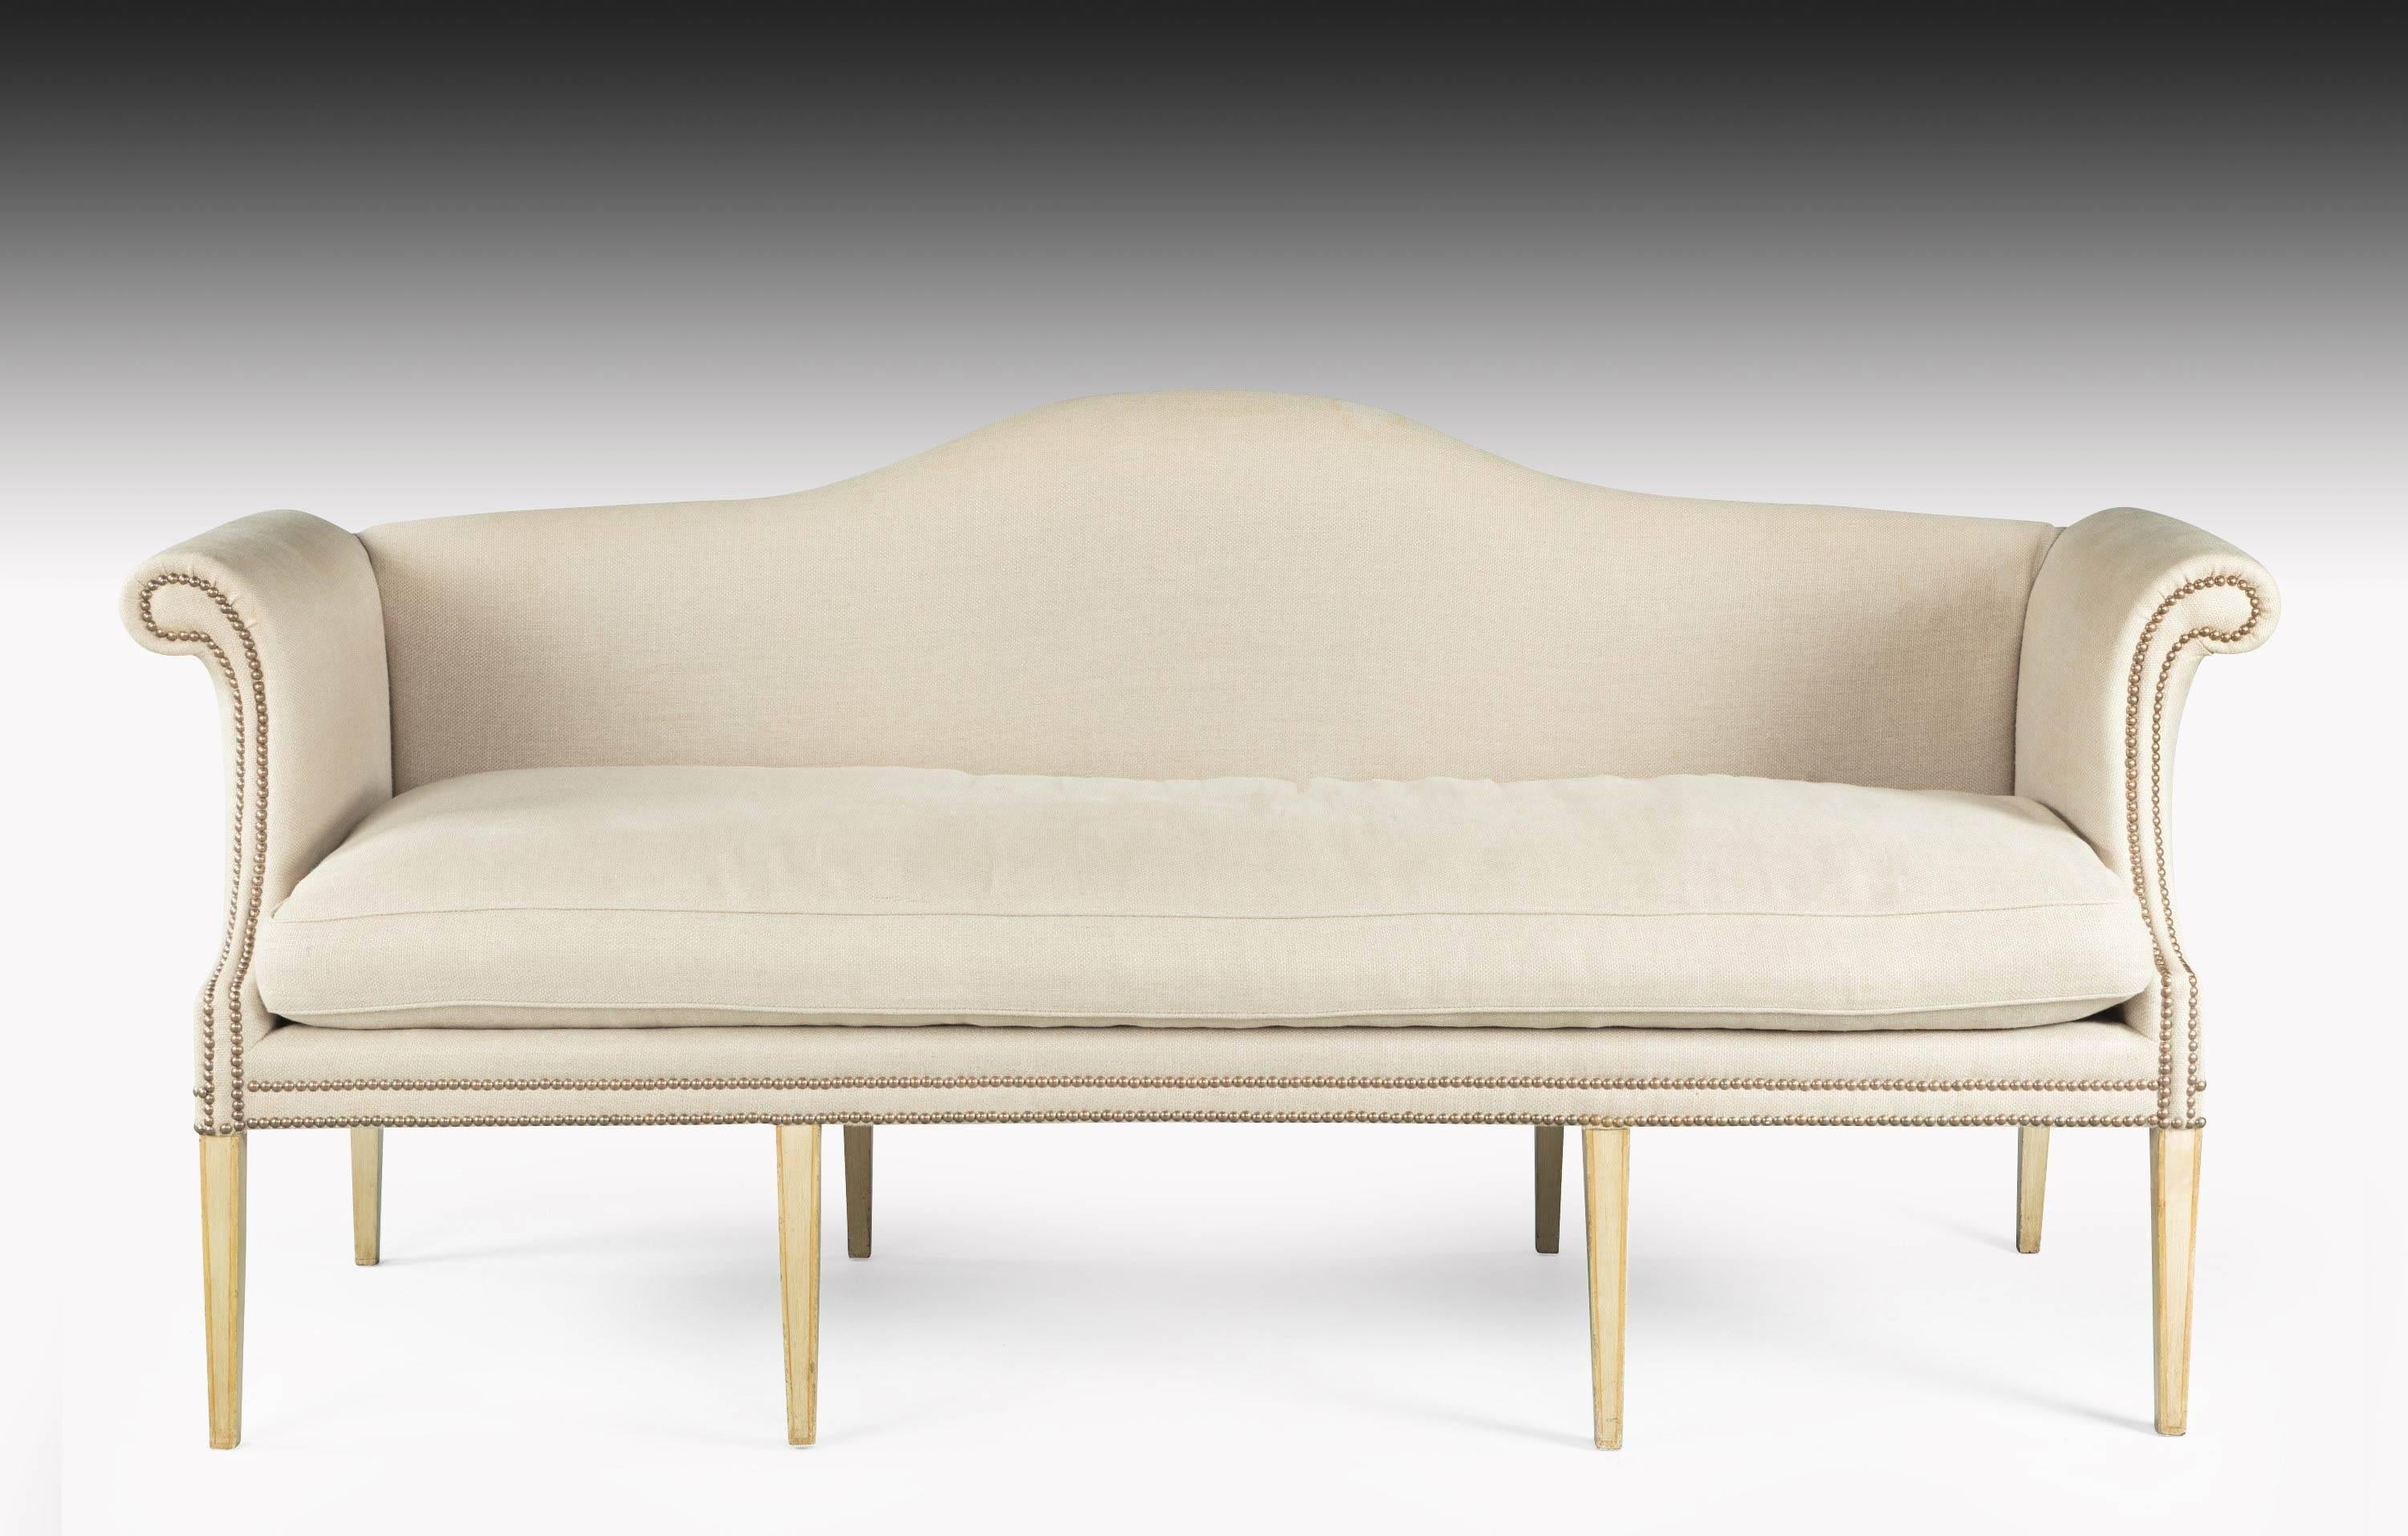 A large camelback sofa, the framework of ivory paint original, but now somewhat tired. 

Measure: Seat height 21 inches.